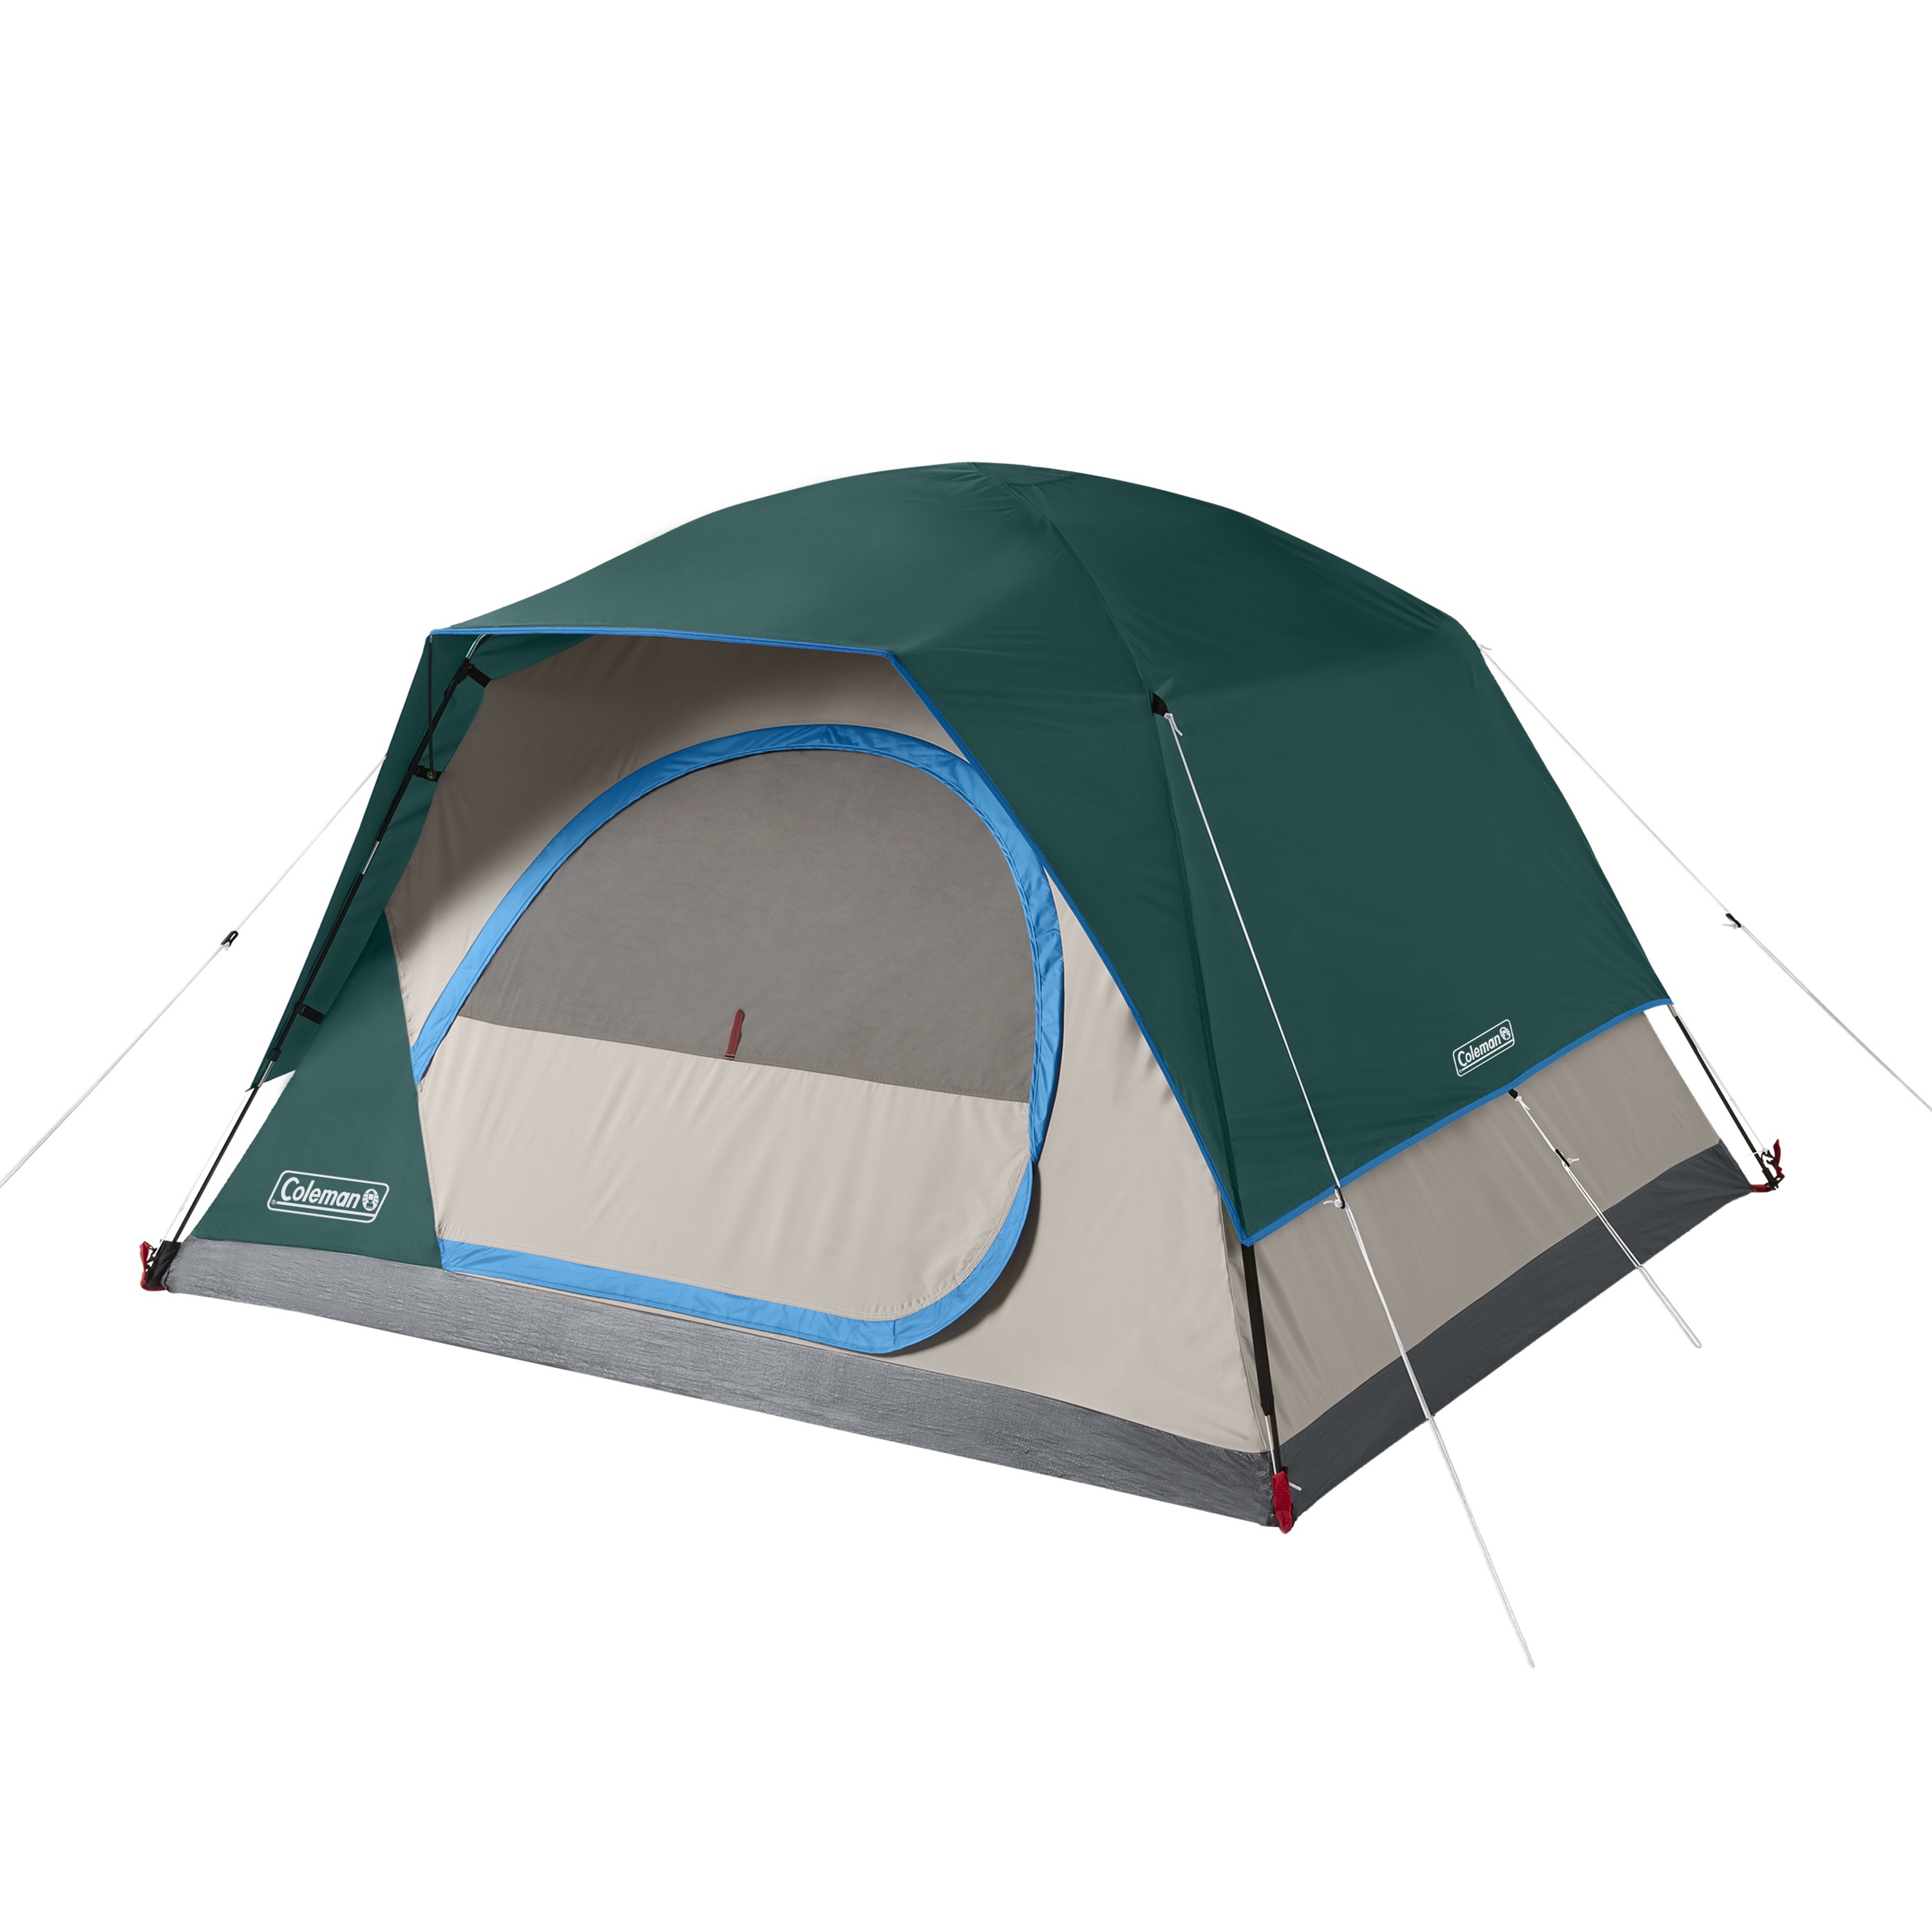 Coleman 4-Person Skydome Camping Tent, Evergreen - image 1 of 7